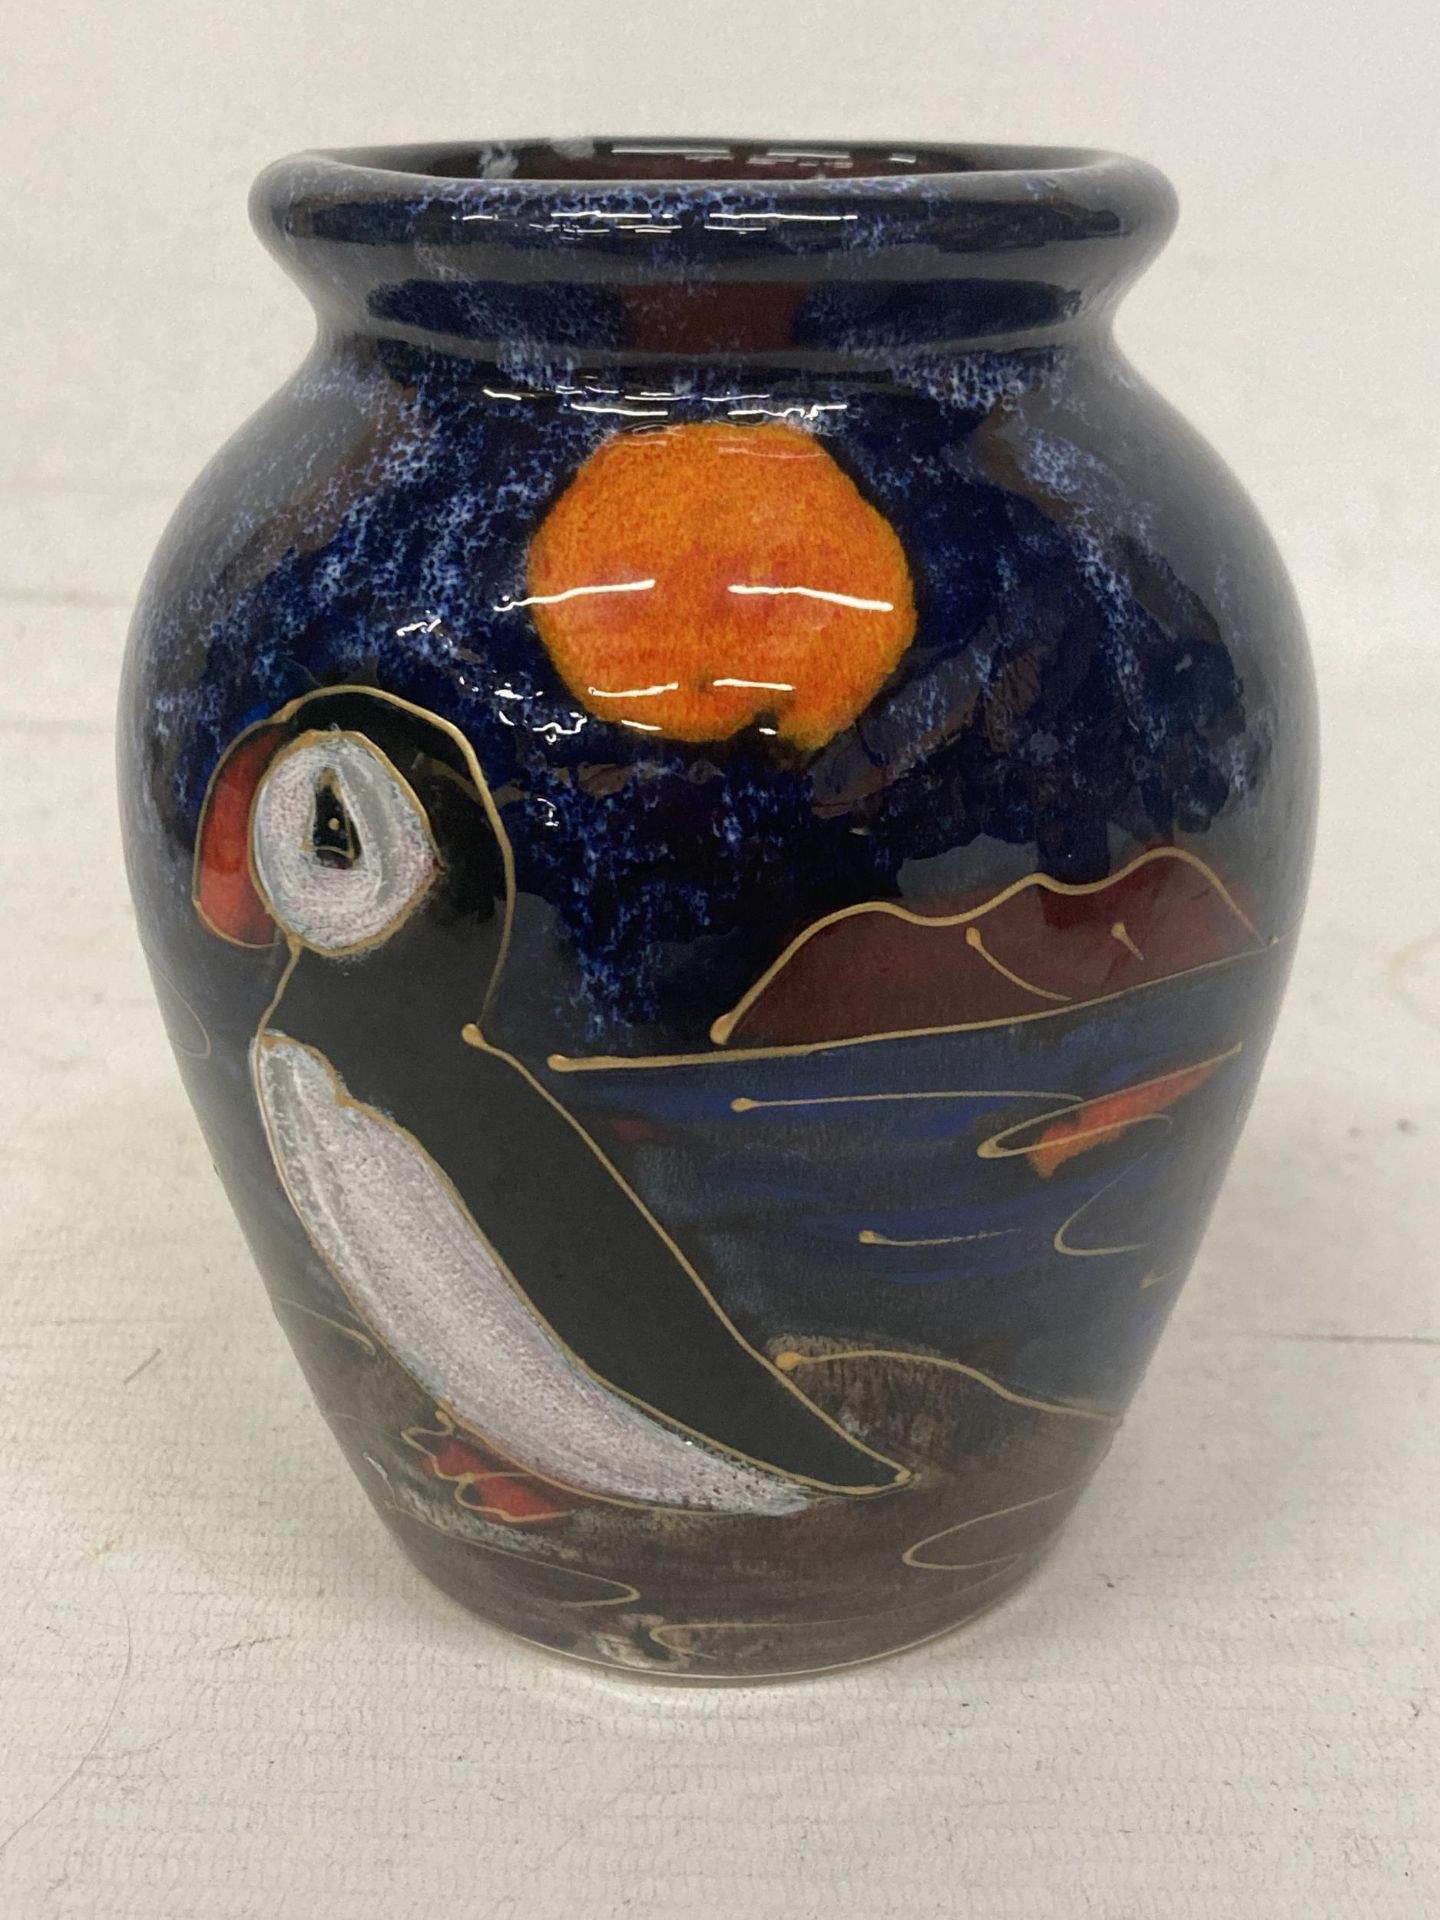 AN ANITA HARRIS PUFFIN VASE SIGNED IN GOLD